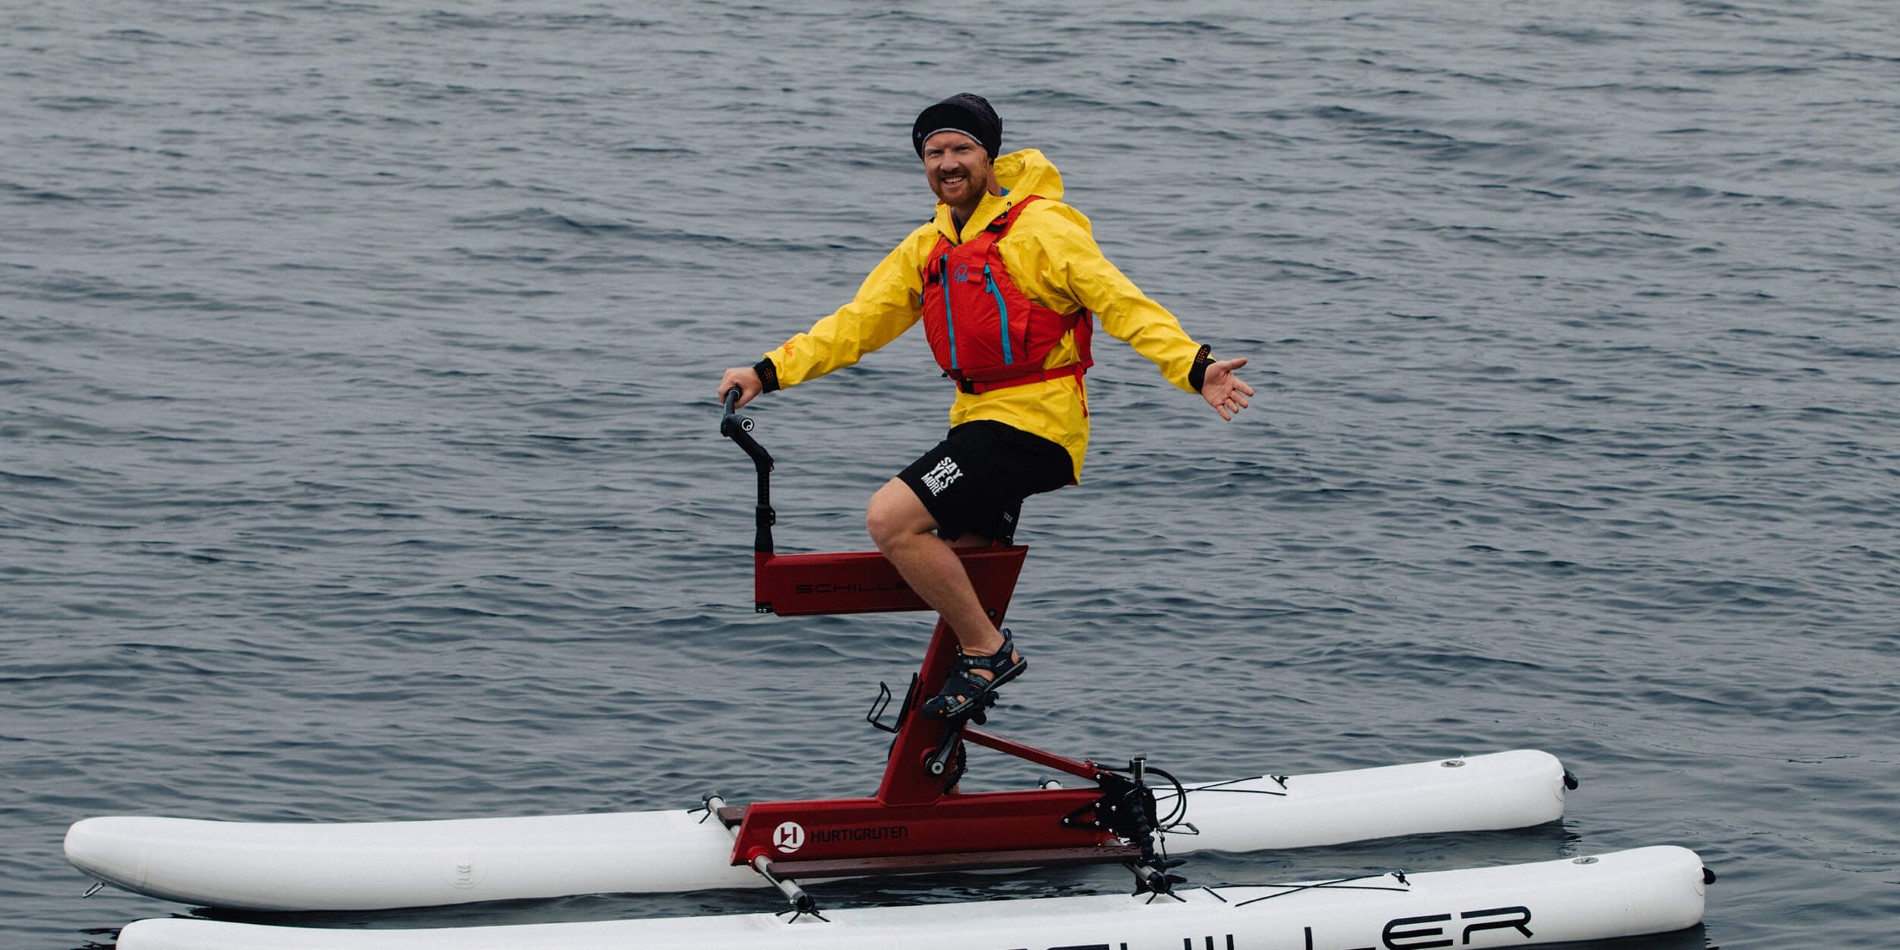 David Cornthwaite riding on the back of a boat in a body of water